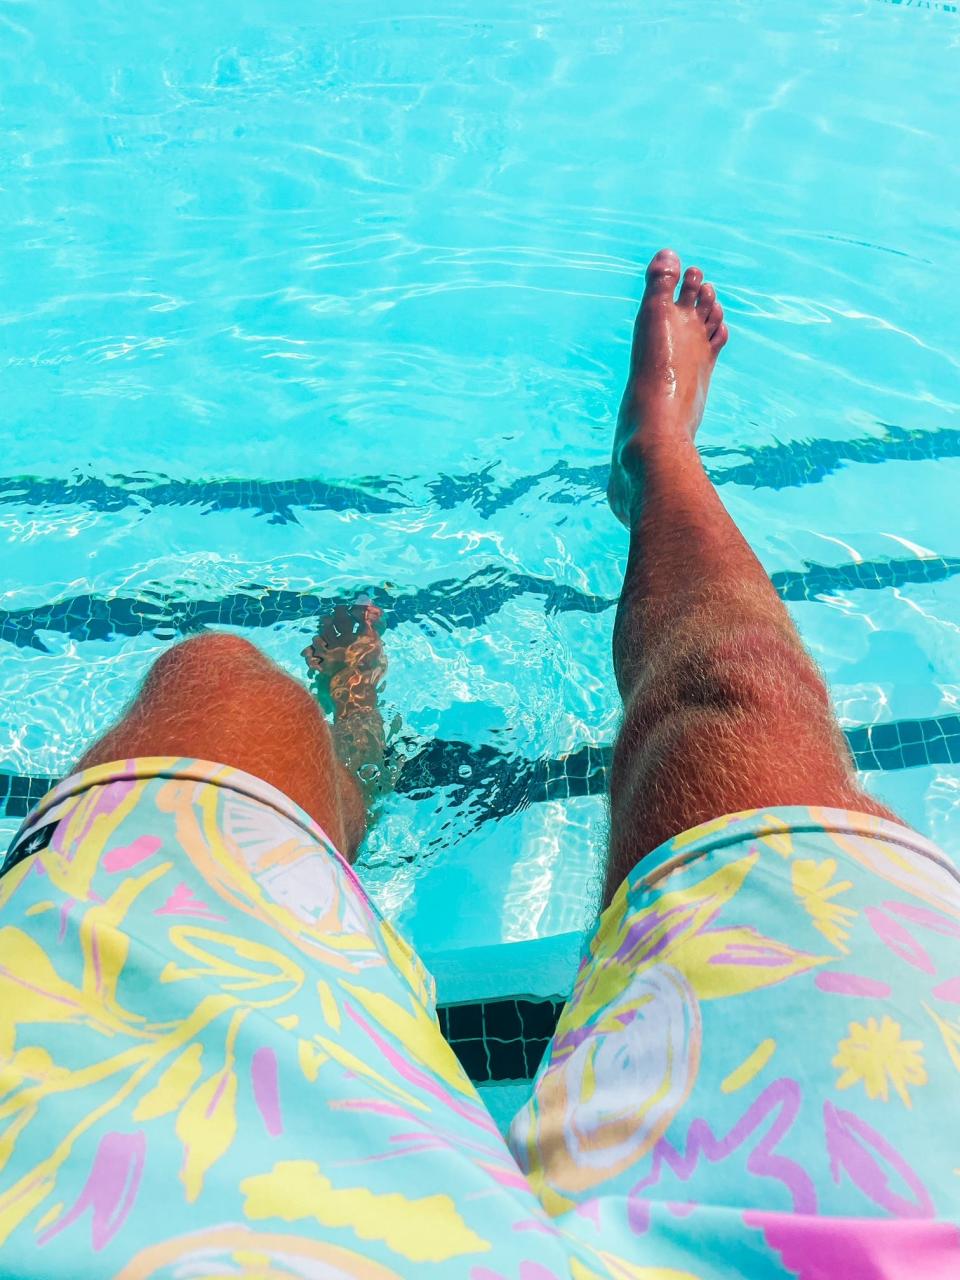 Coastal Cool features a variety of different prints in men's swim trunks, pictured here, and women's swimwear and beachwear.